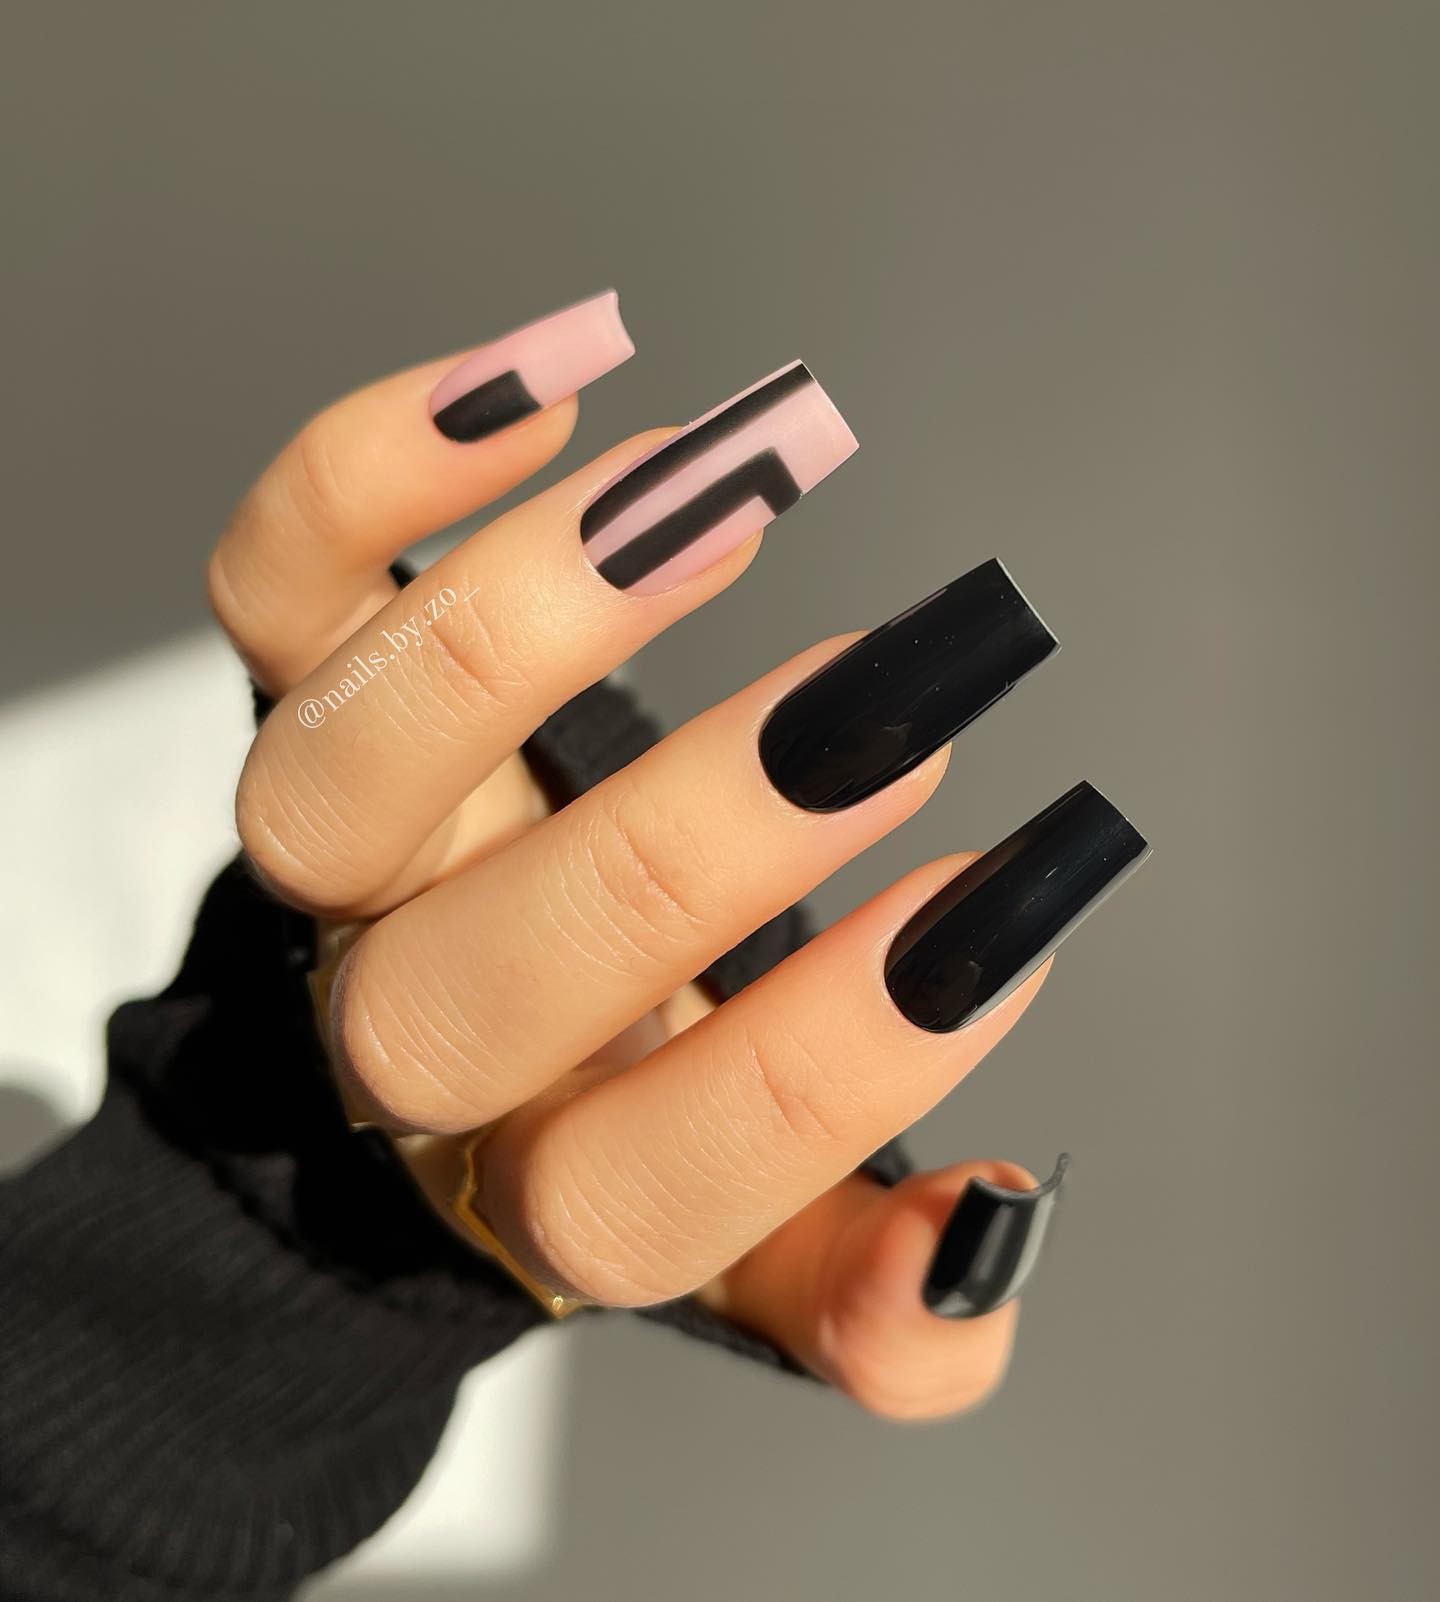 Long Square Black and Beige Nails with Geometric Design